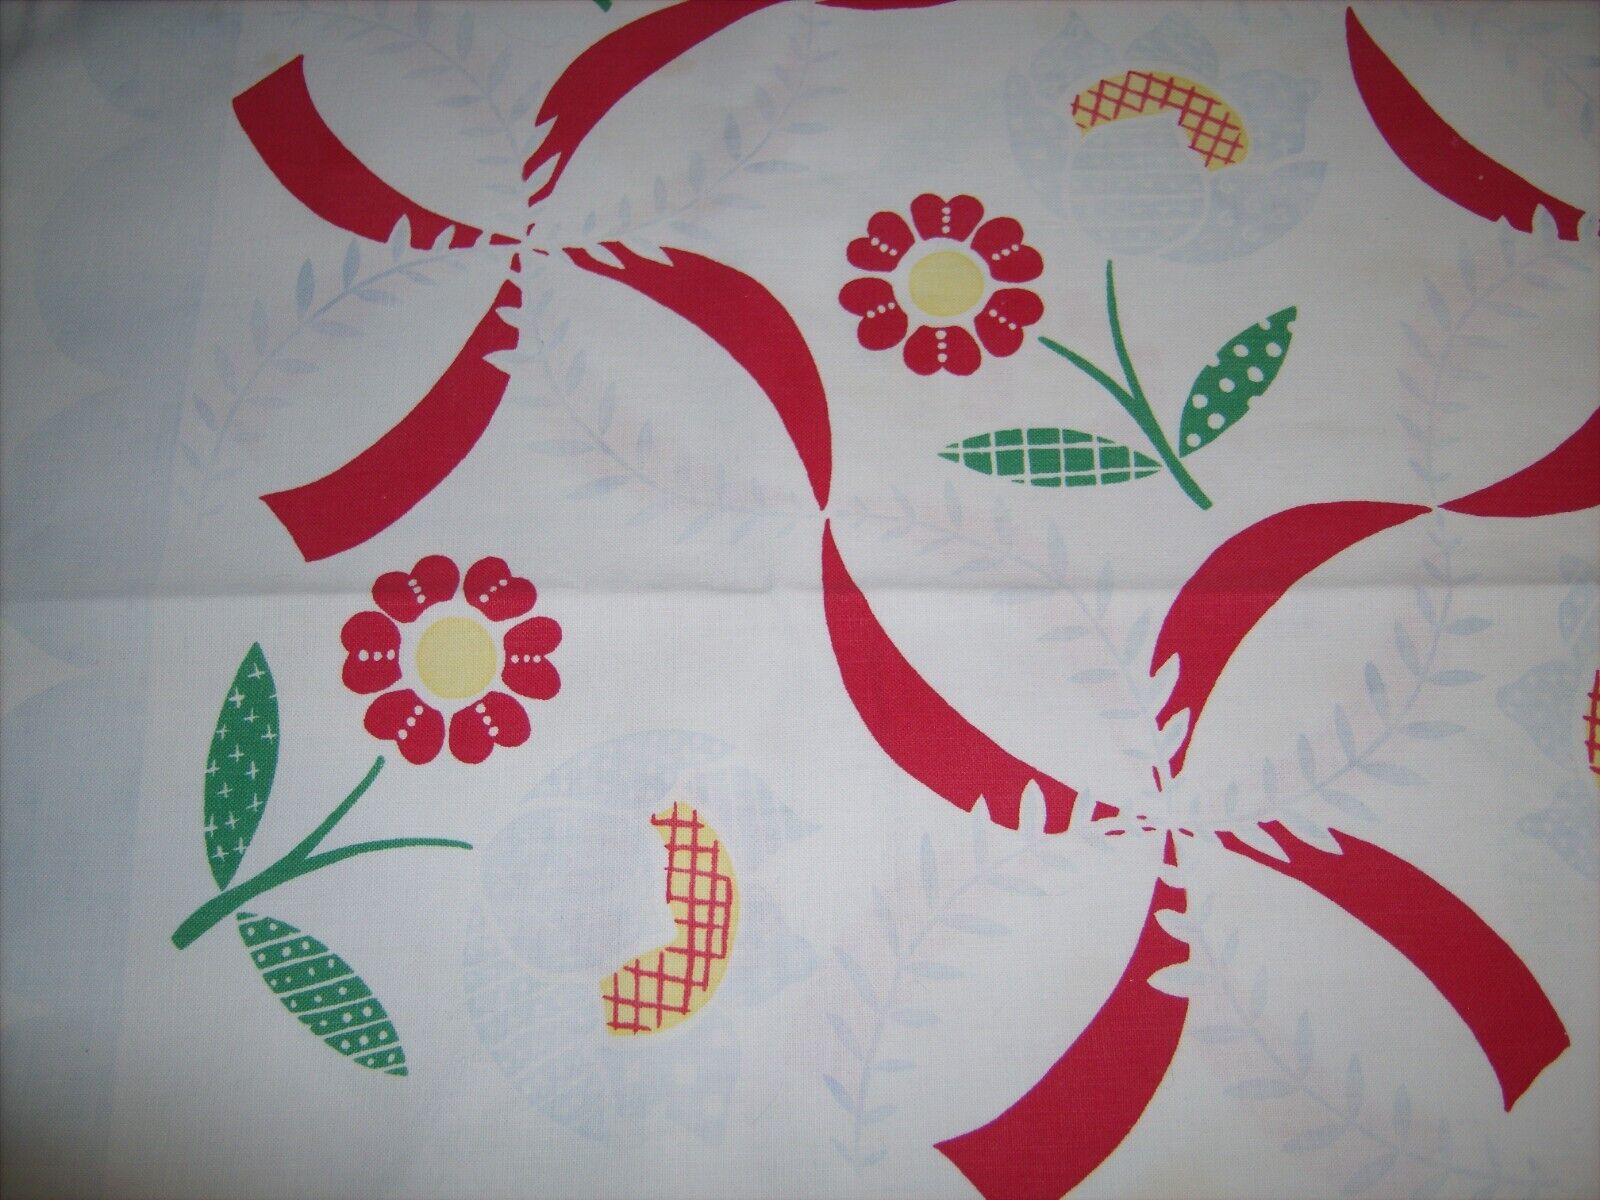 VTG Cotton Linen Tablecloth 52” X 48” 1940’s MCM Red Yellow Green Floral Kitschy